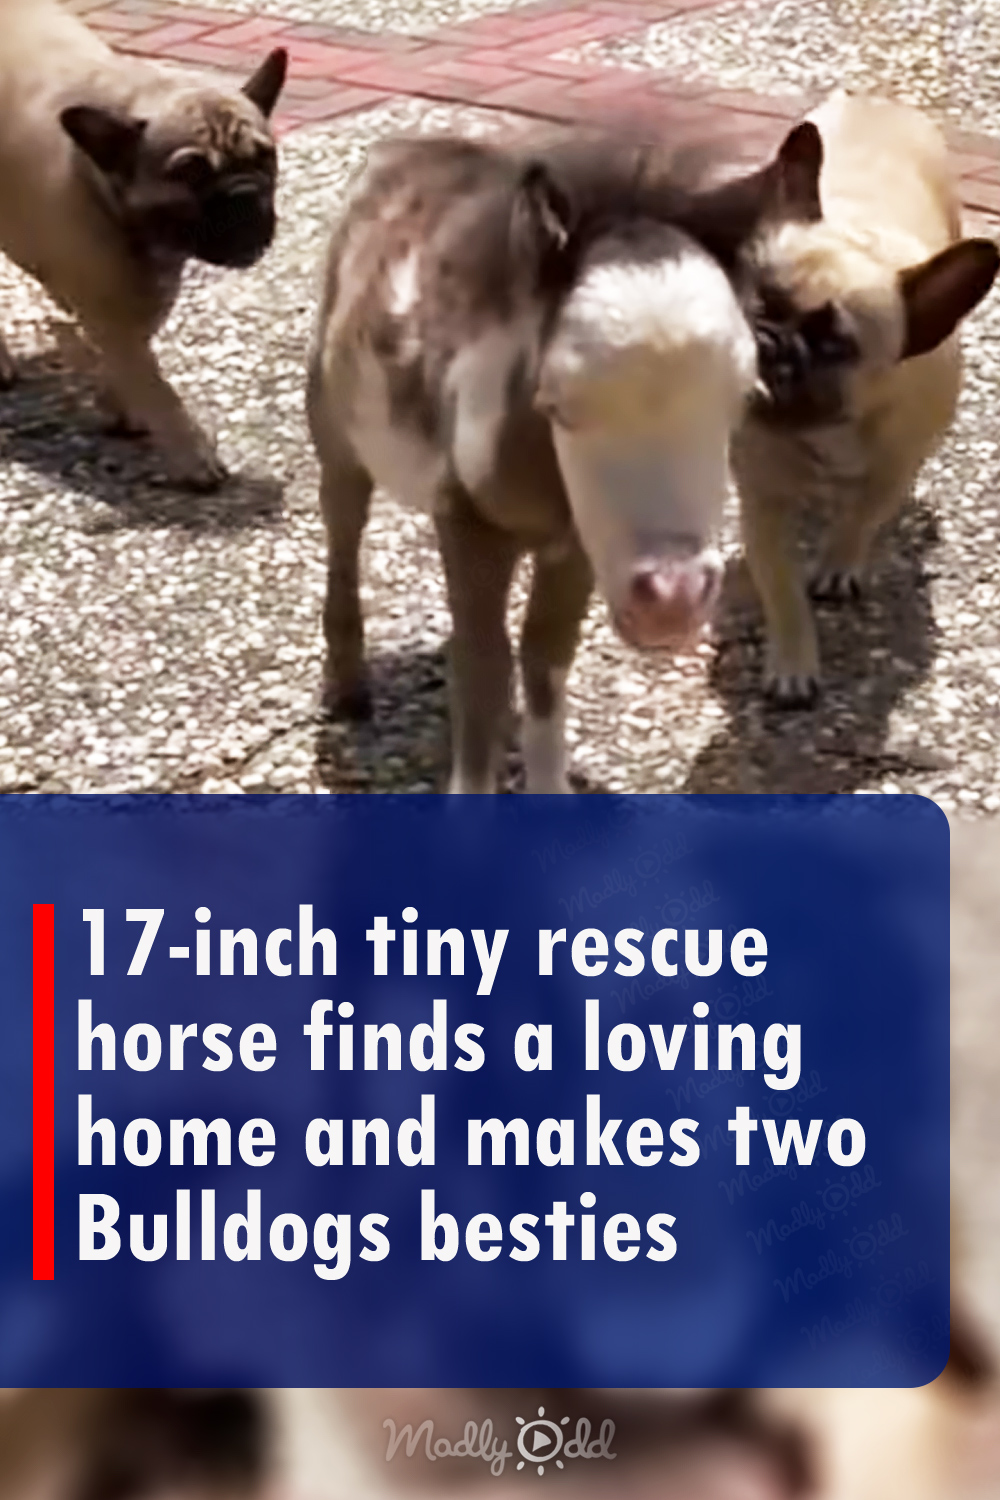 17-inch tiny rescue horse finds a loving home and makes two Bulldogs besties